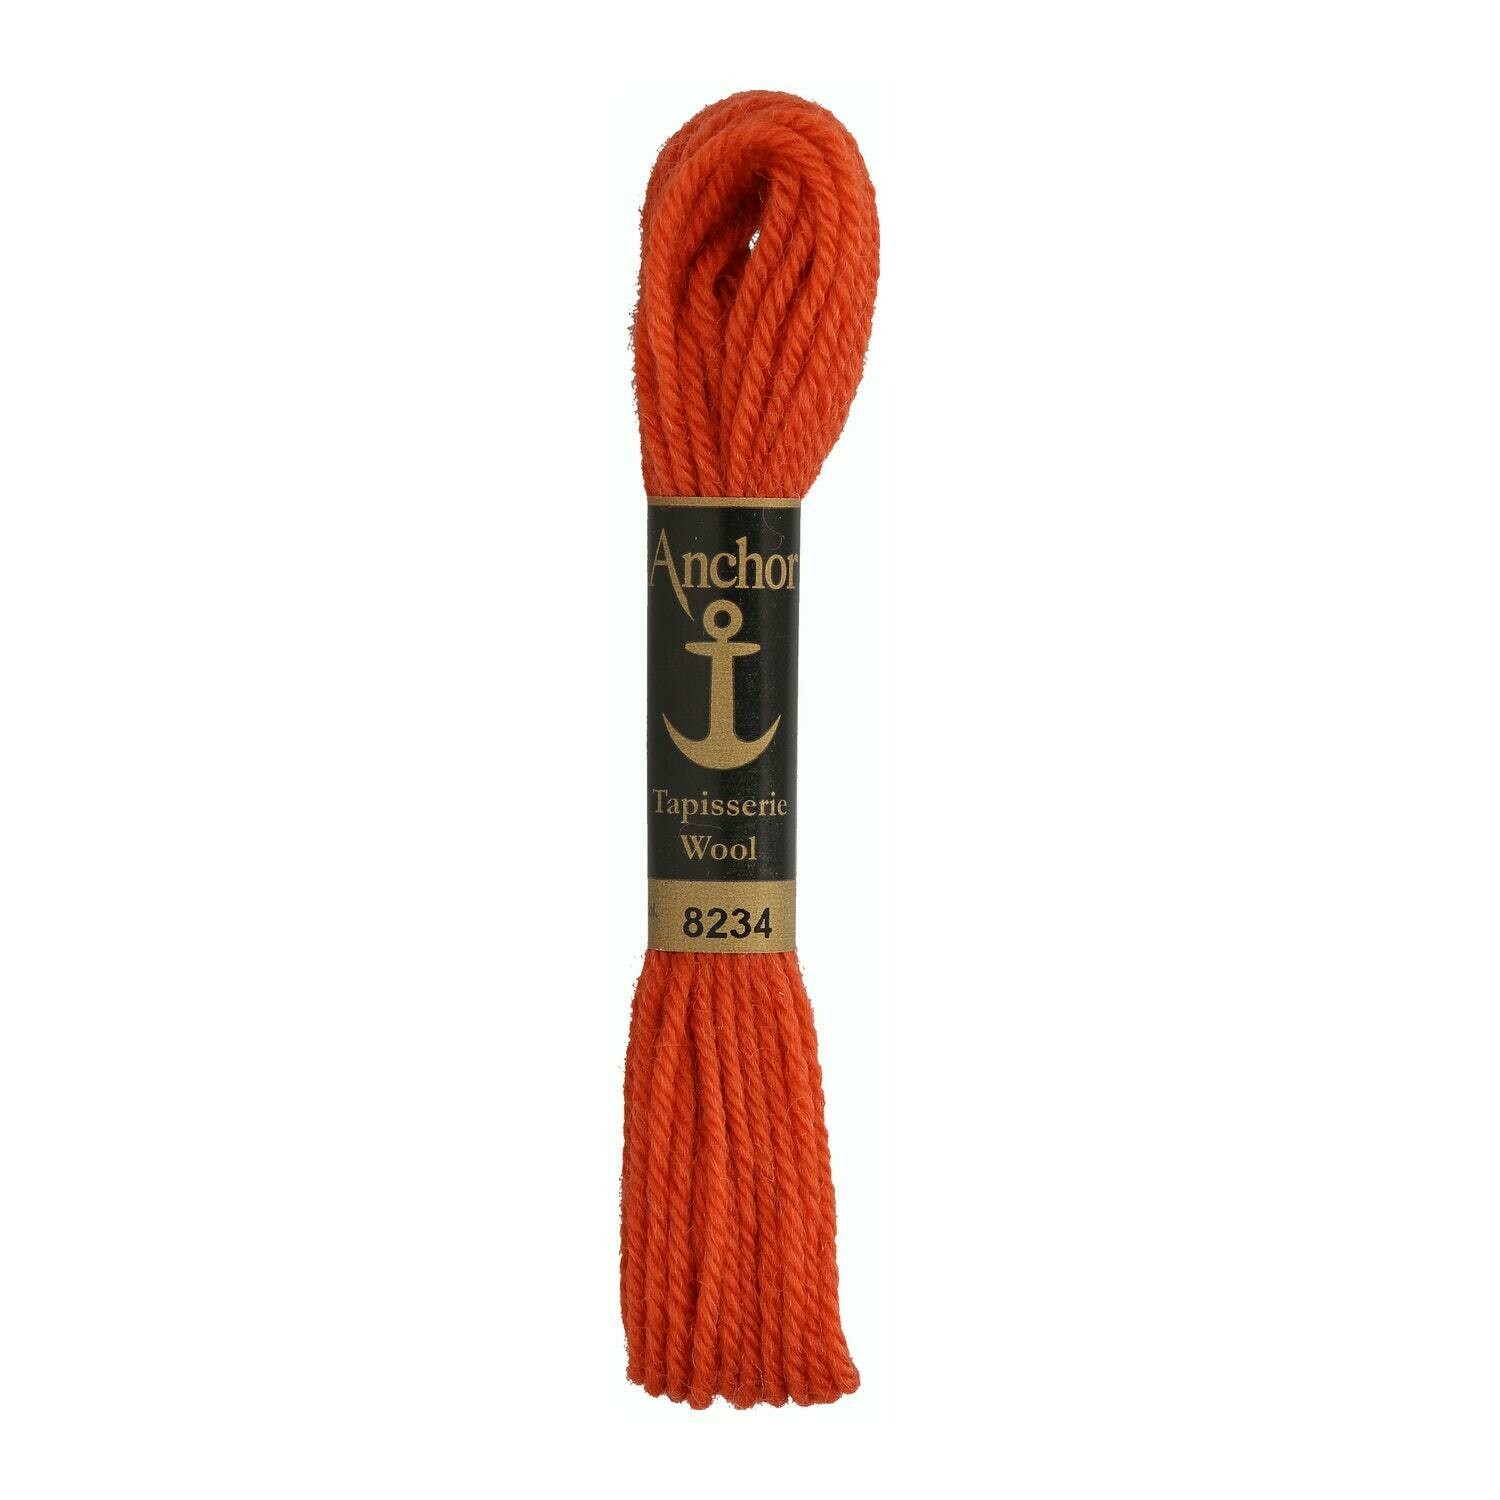 Anchor Tapisserie Wool #08234